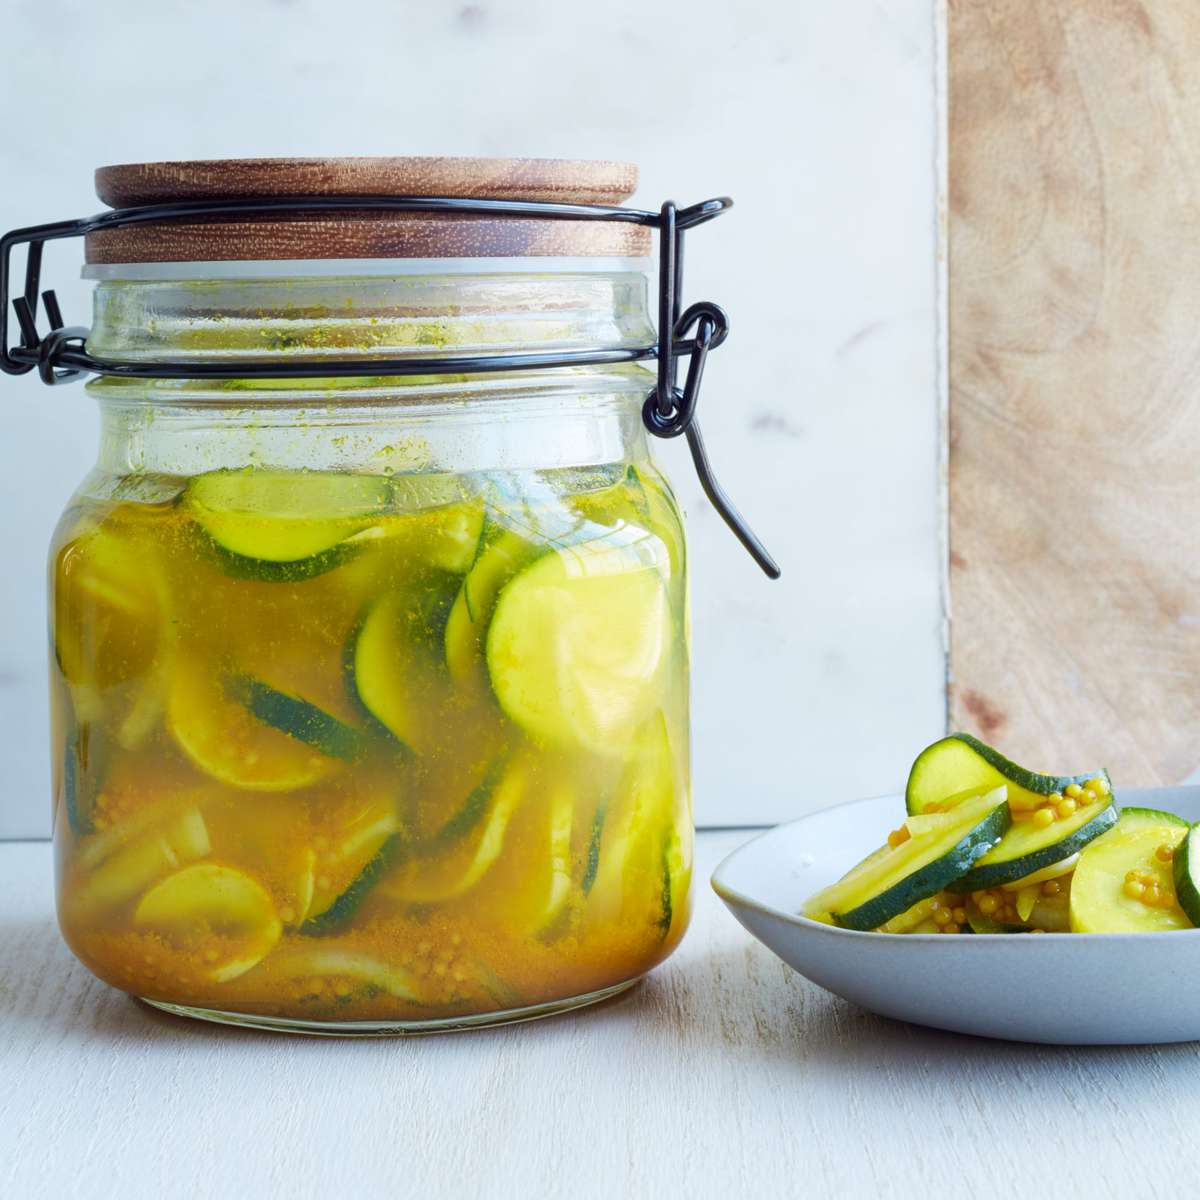 Bread-and-Butter Zucchini Pickles 